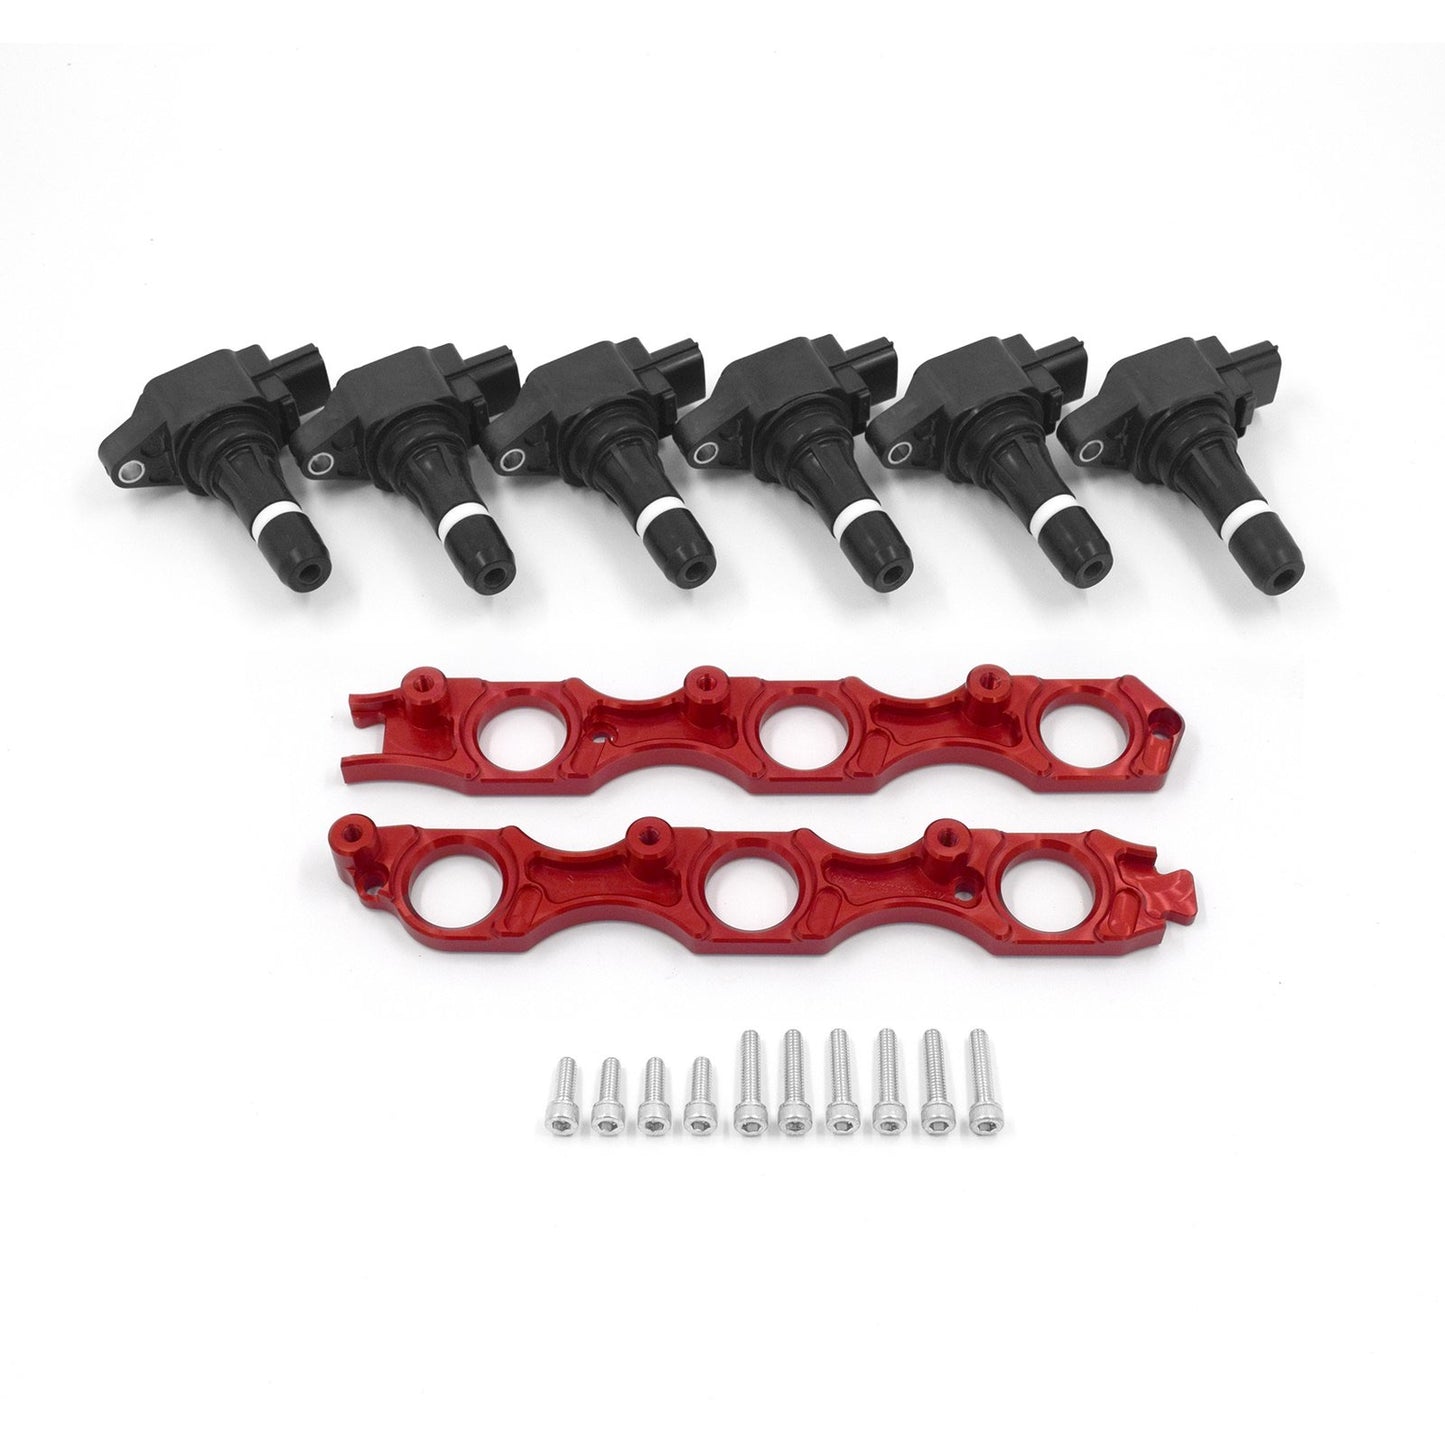 VR38 R35 Coil Kit for Toyota JZ Engines